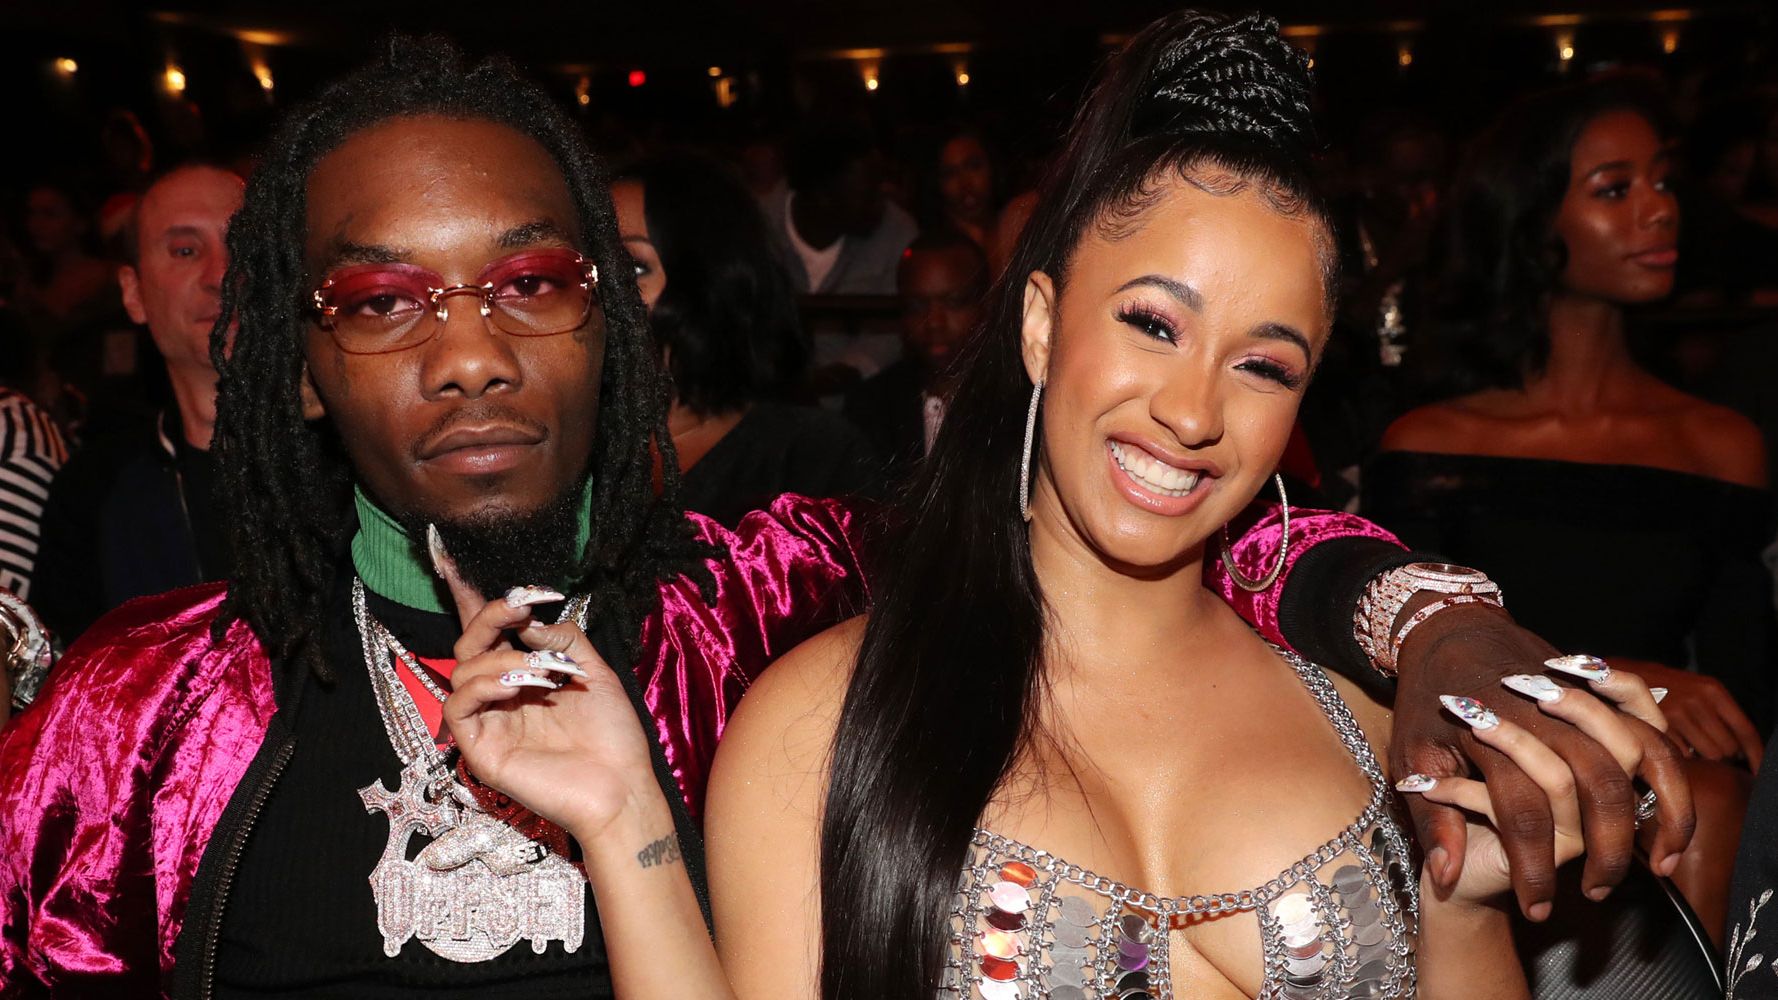 Baby bling! Cardi B and husband Offset's daughter Kulture gets